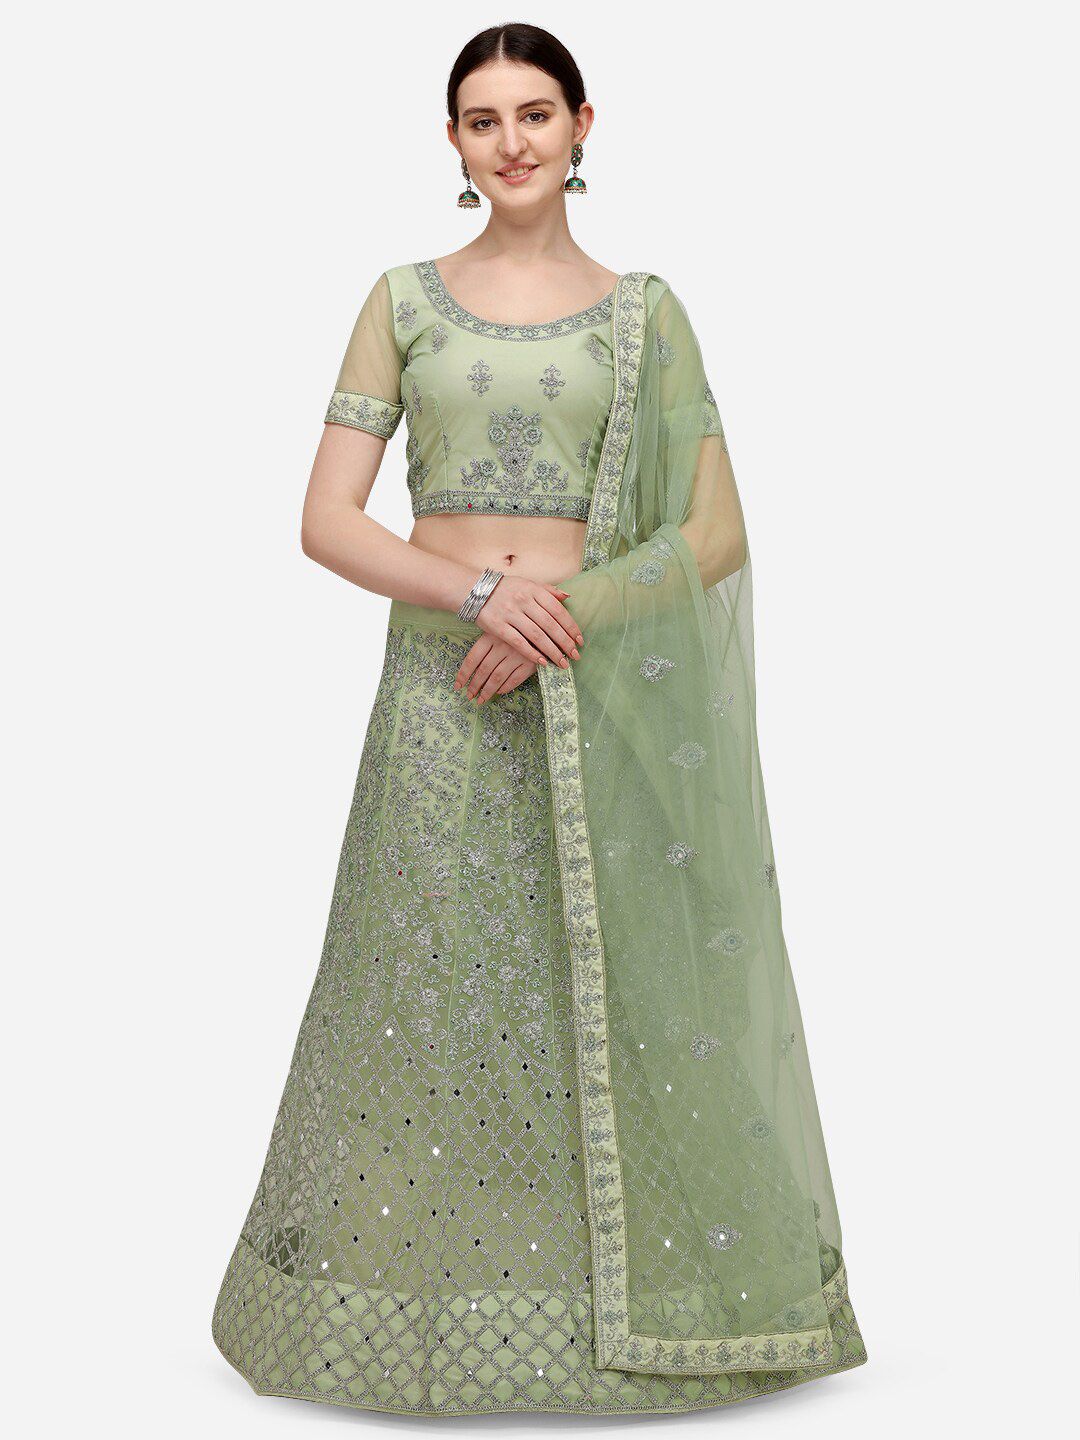 VRSALES Women Lime Green Embroidered Semi-Stitched Lehenga & Blouse With Dupatta Price in India